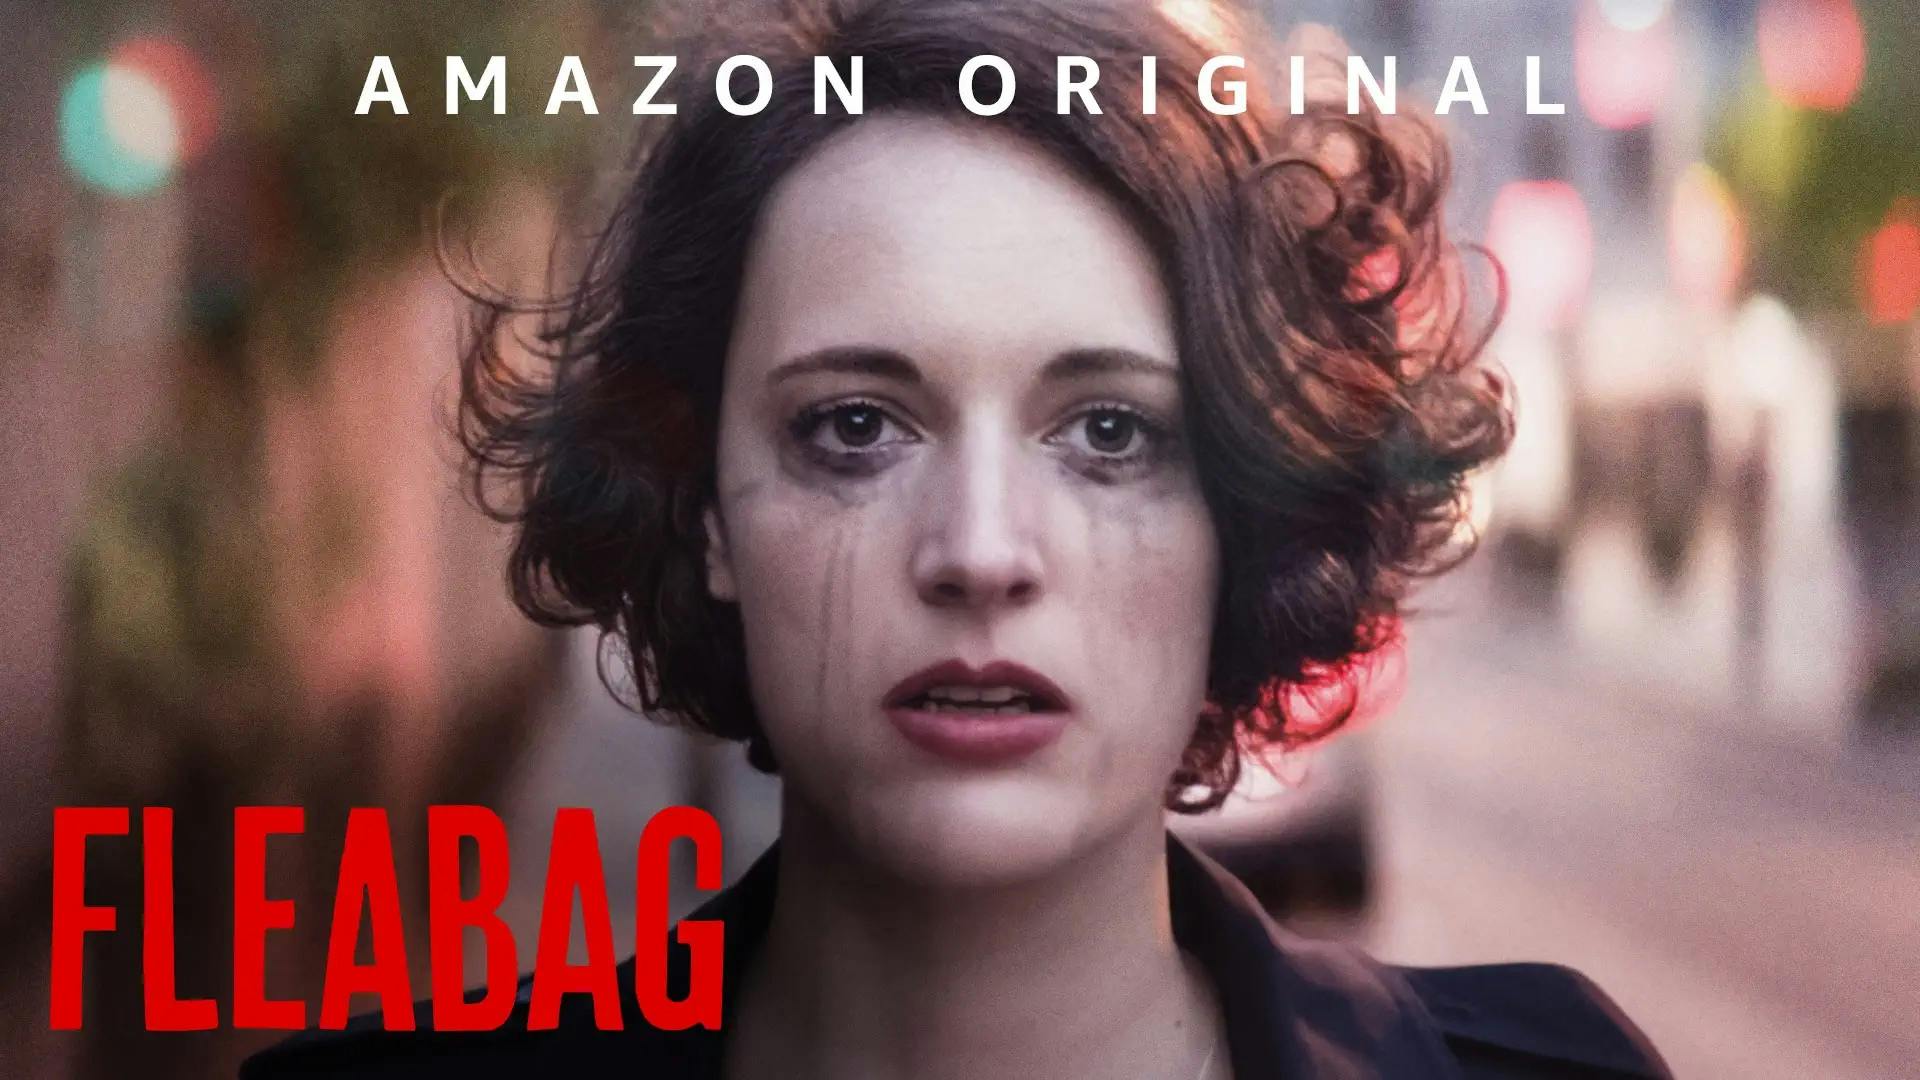 The thumbnail cover for the tv show Fleabag